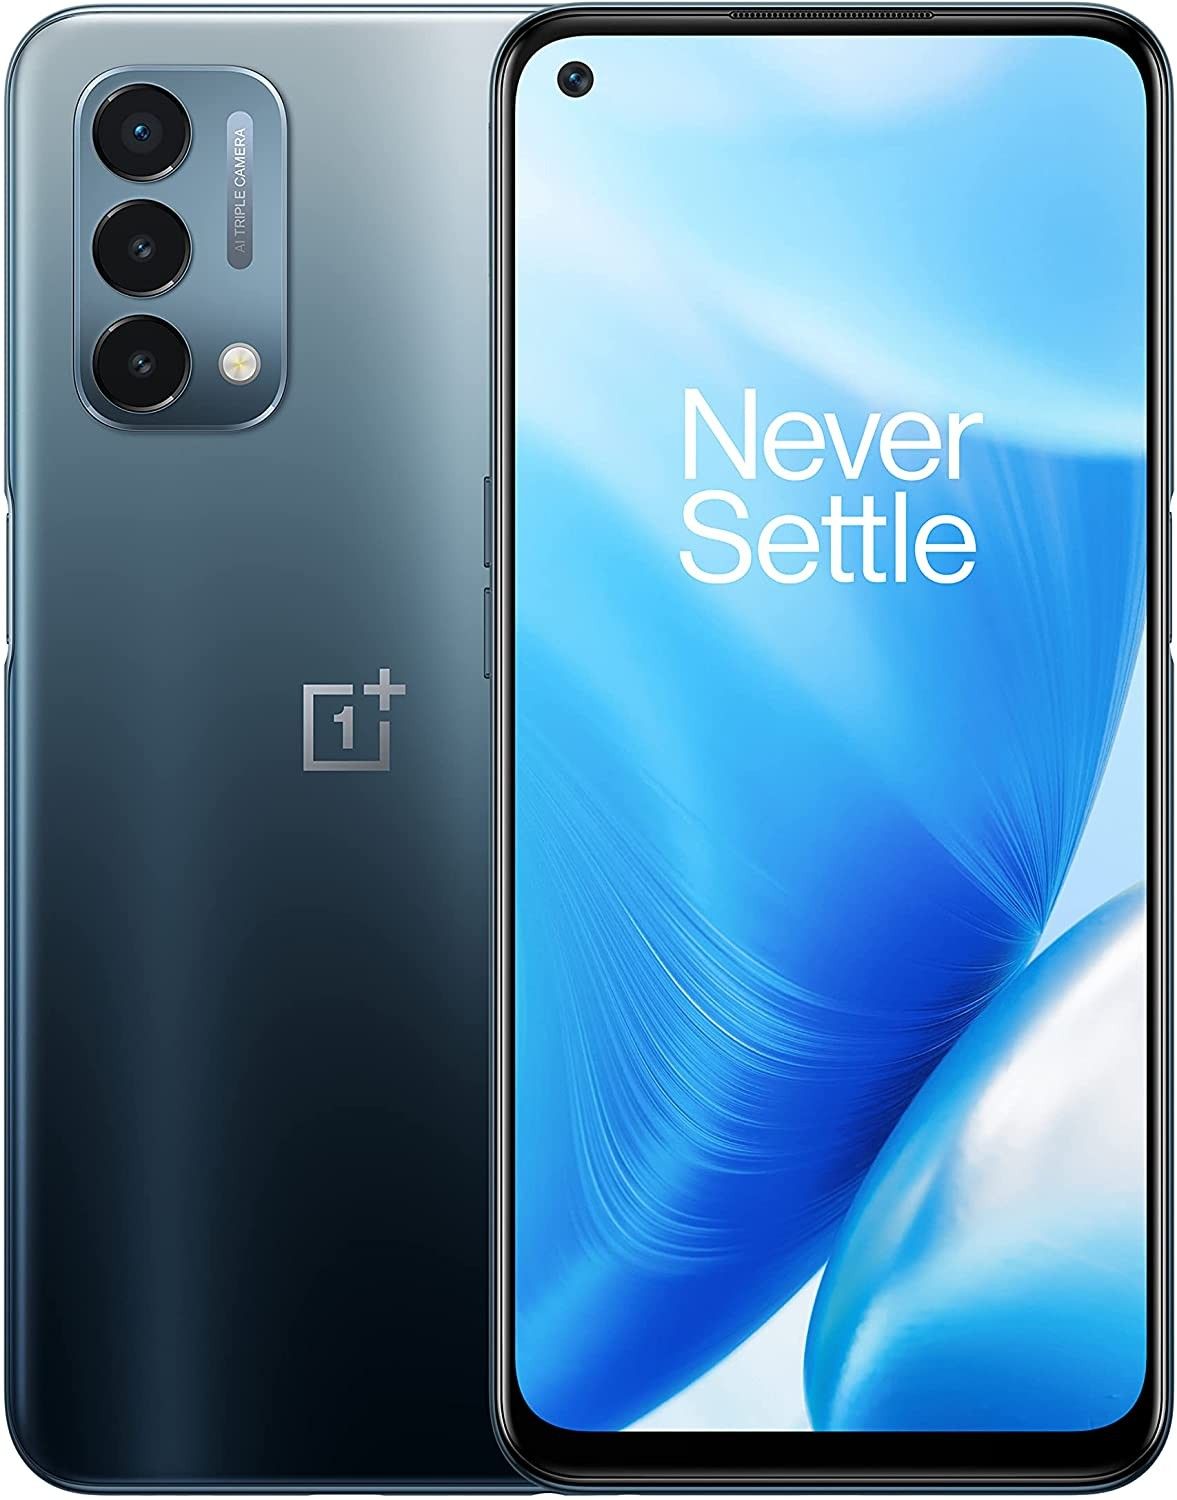 OnePlus Nord N200 product box image